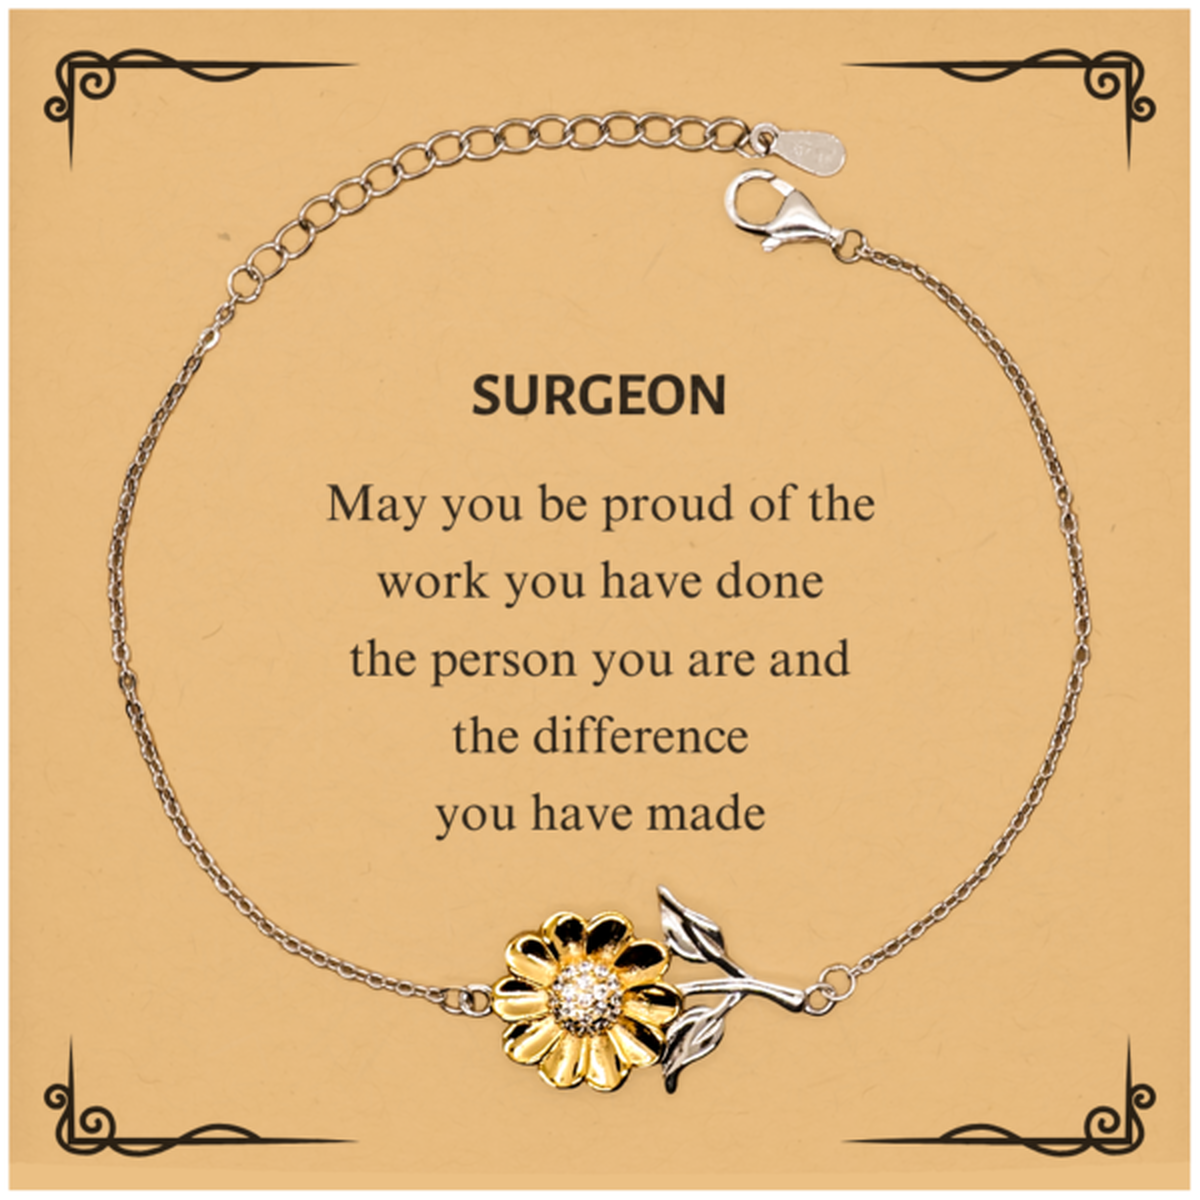 Surgeon May you be proud of the work you have done, Retirement Surgeon Sunflower Bracelet for Colleague Appreciation Gifts Amazing for Surgeon